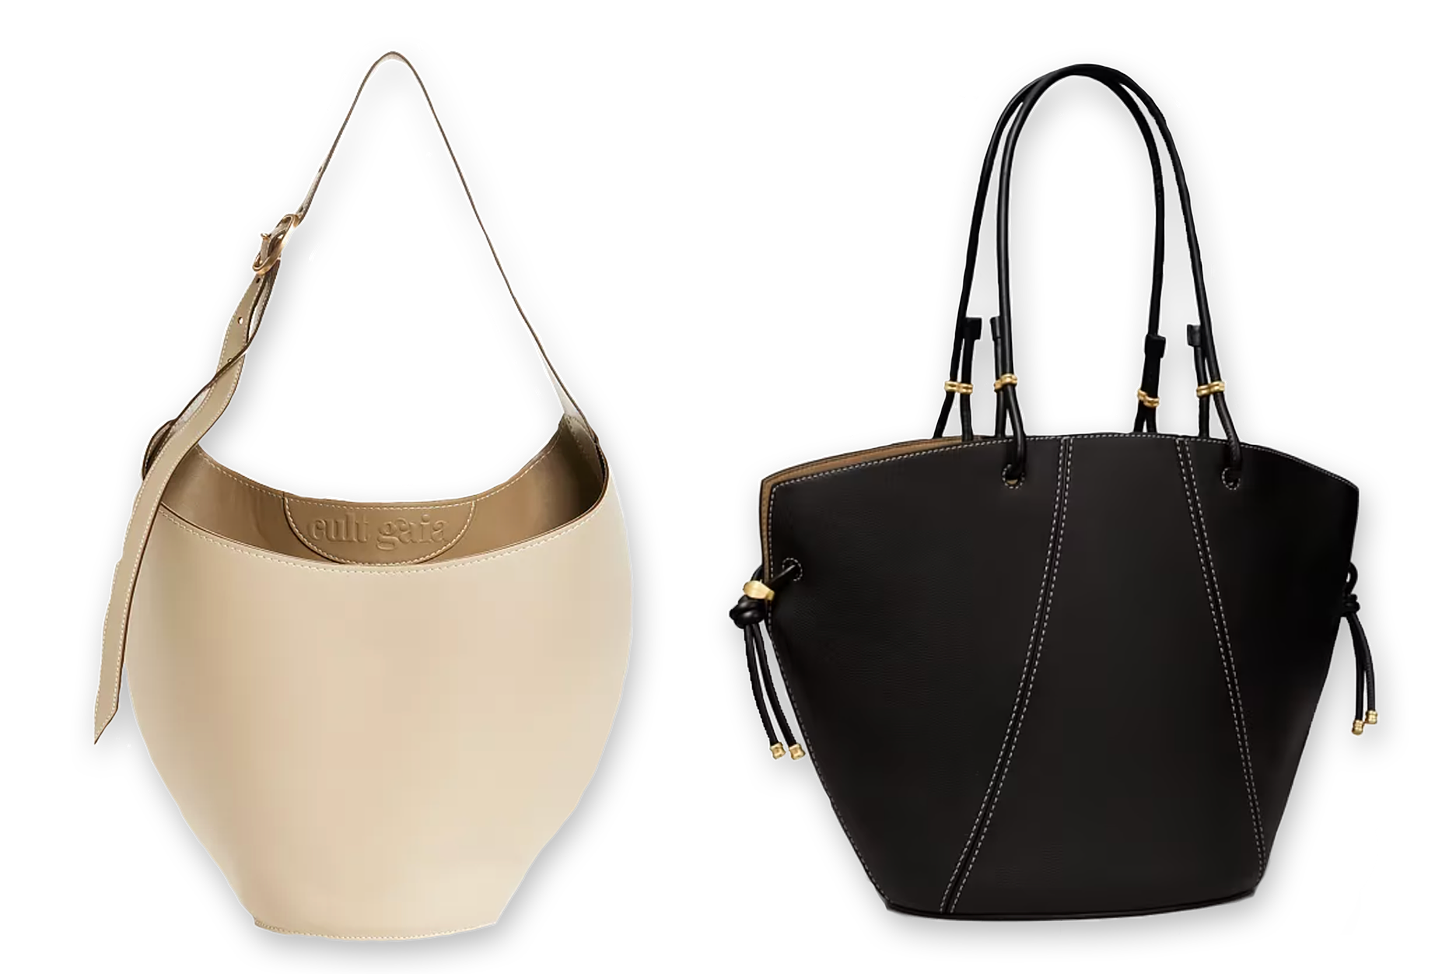 Tote bags from Cult Gaia and Tory Burch.